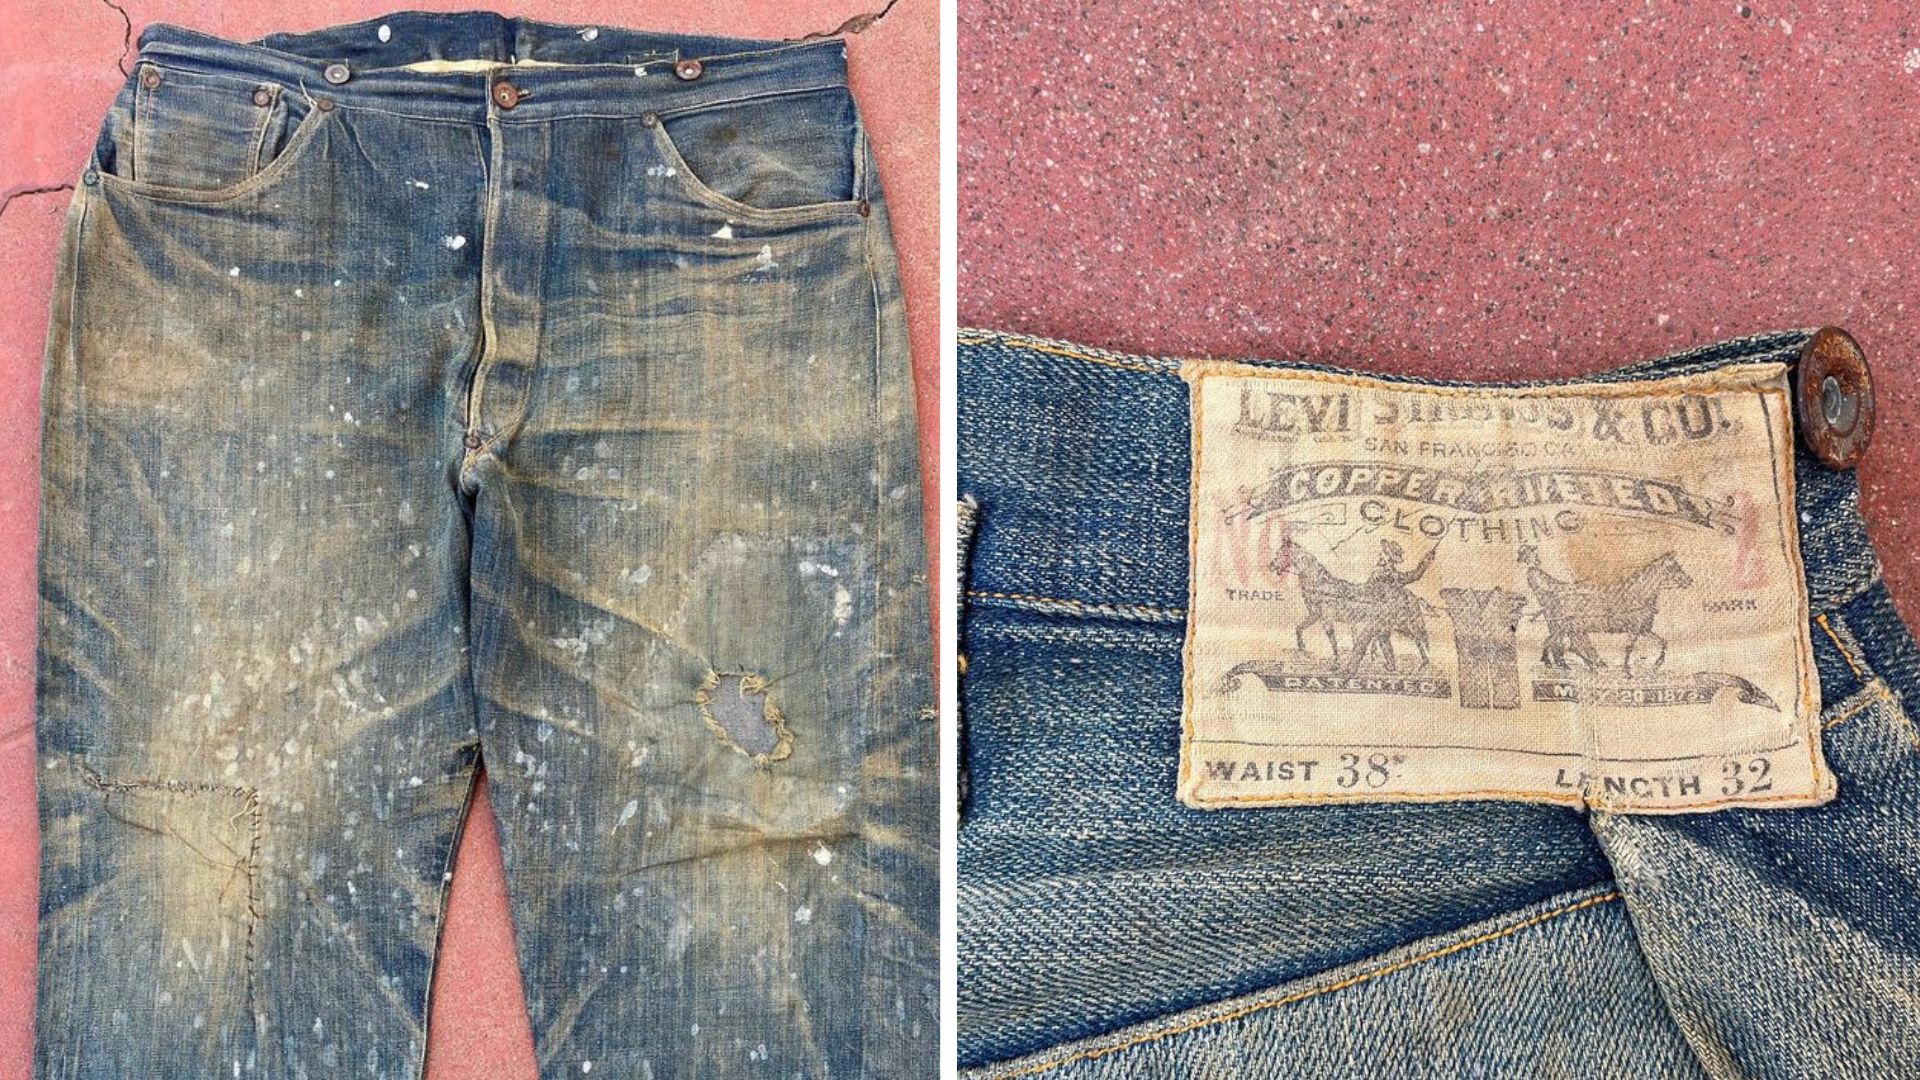 Levi's jeans from 1800s with racist slogan sell for over $120,000 | Rock 101